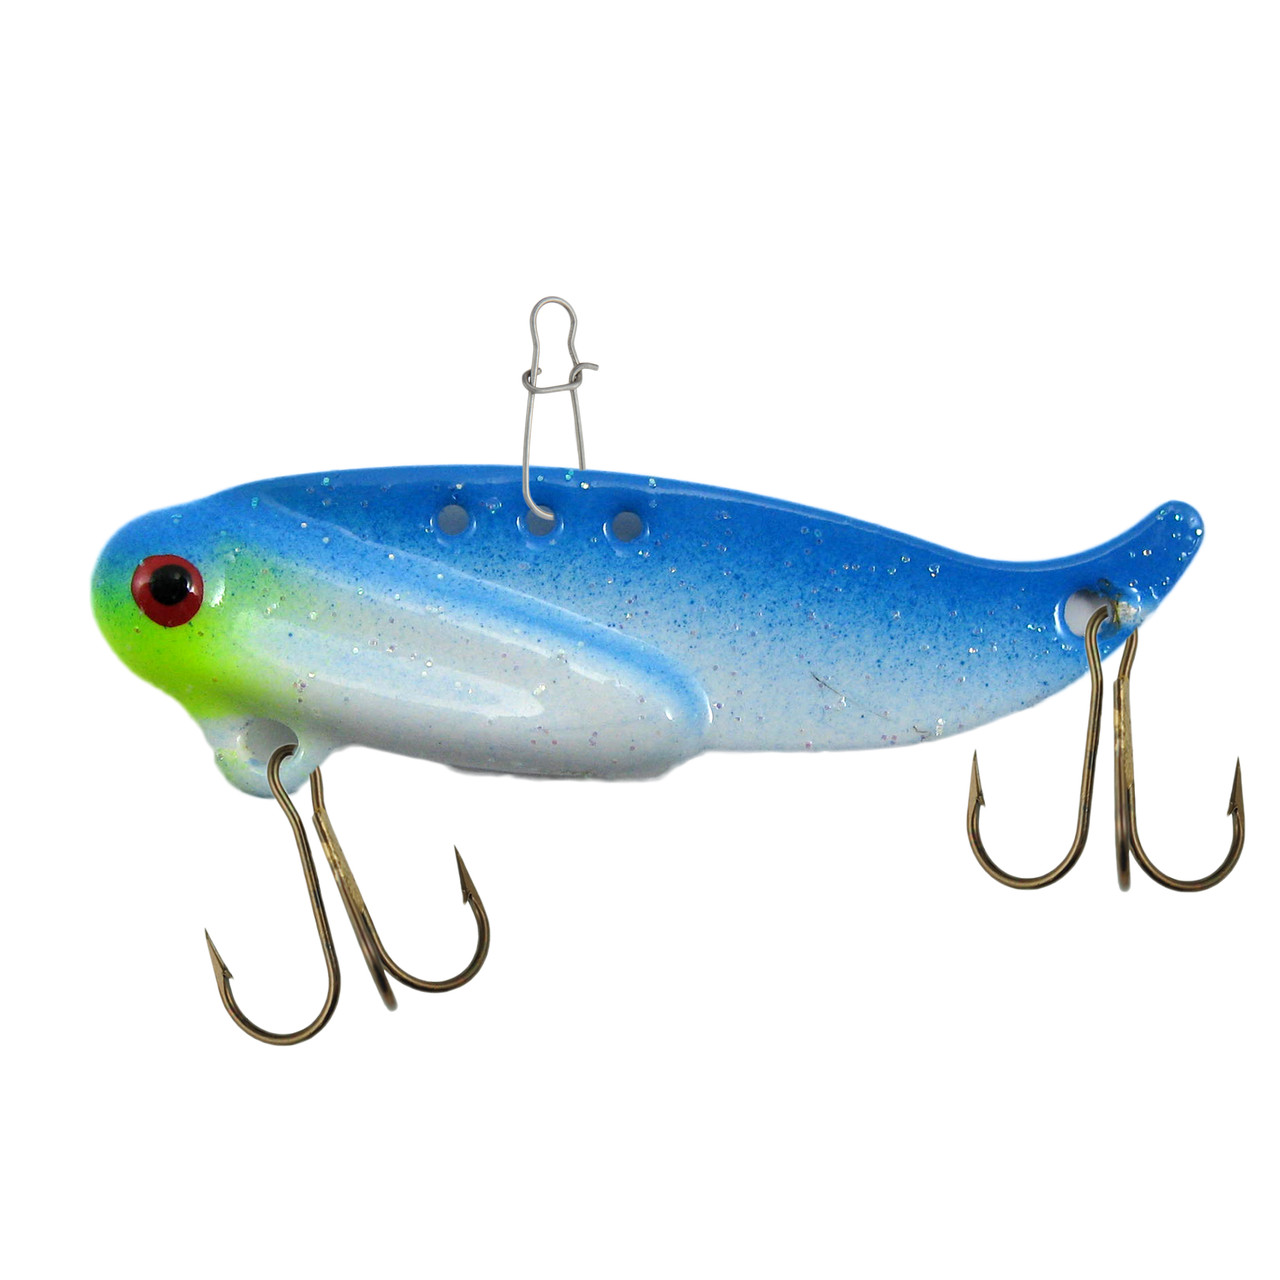 If there is a surface lure heaven, then these brand new, custom